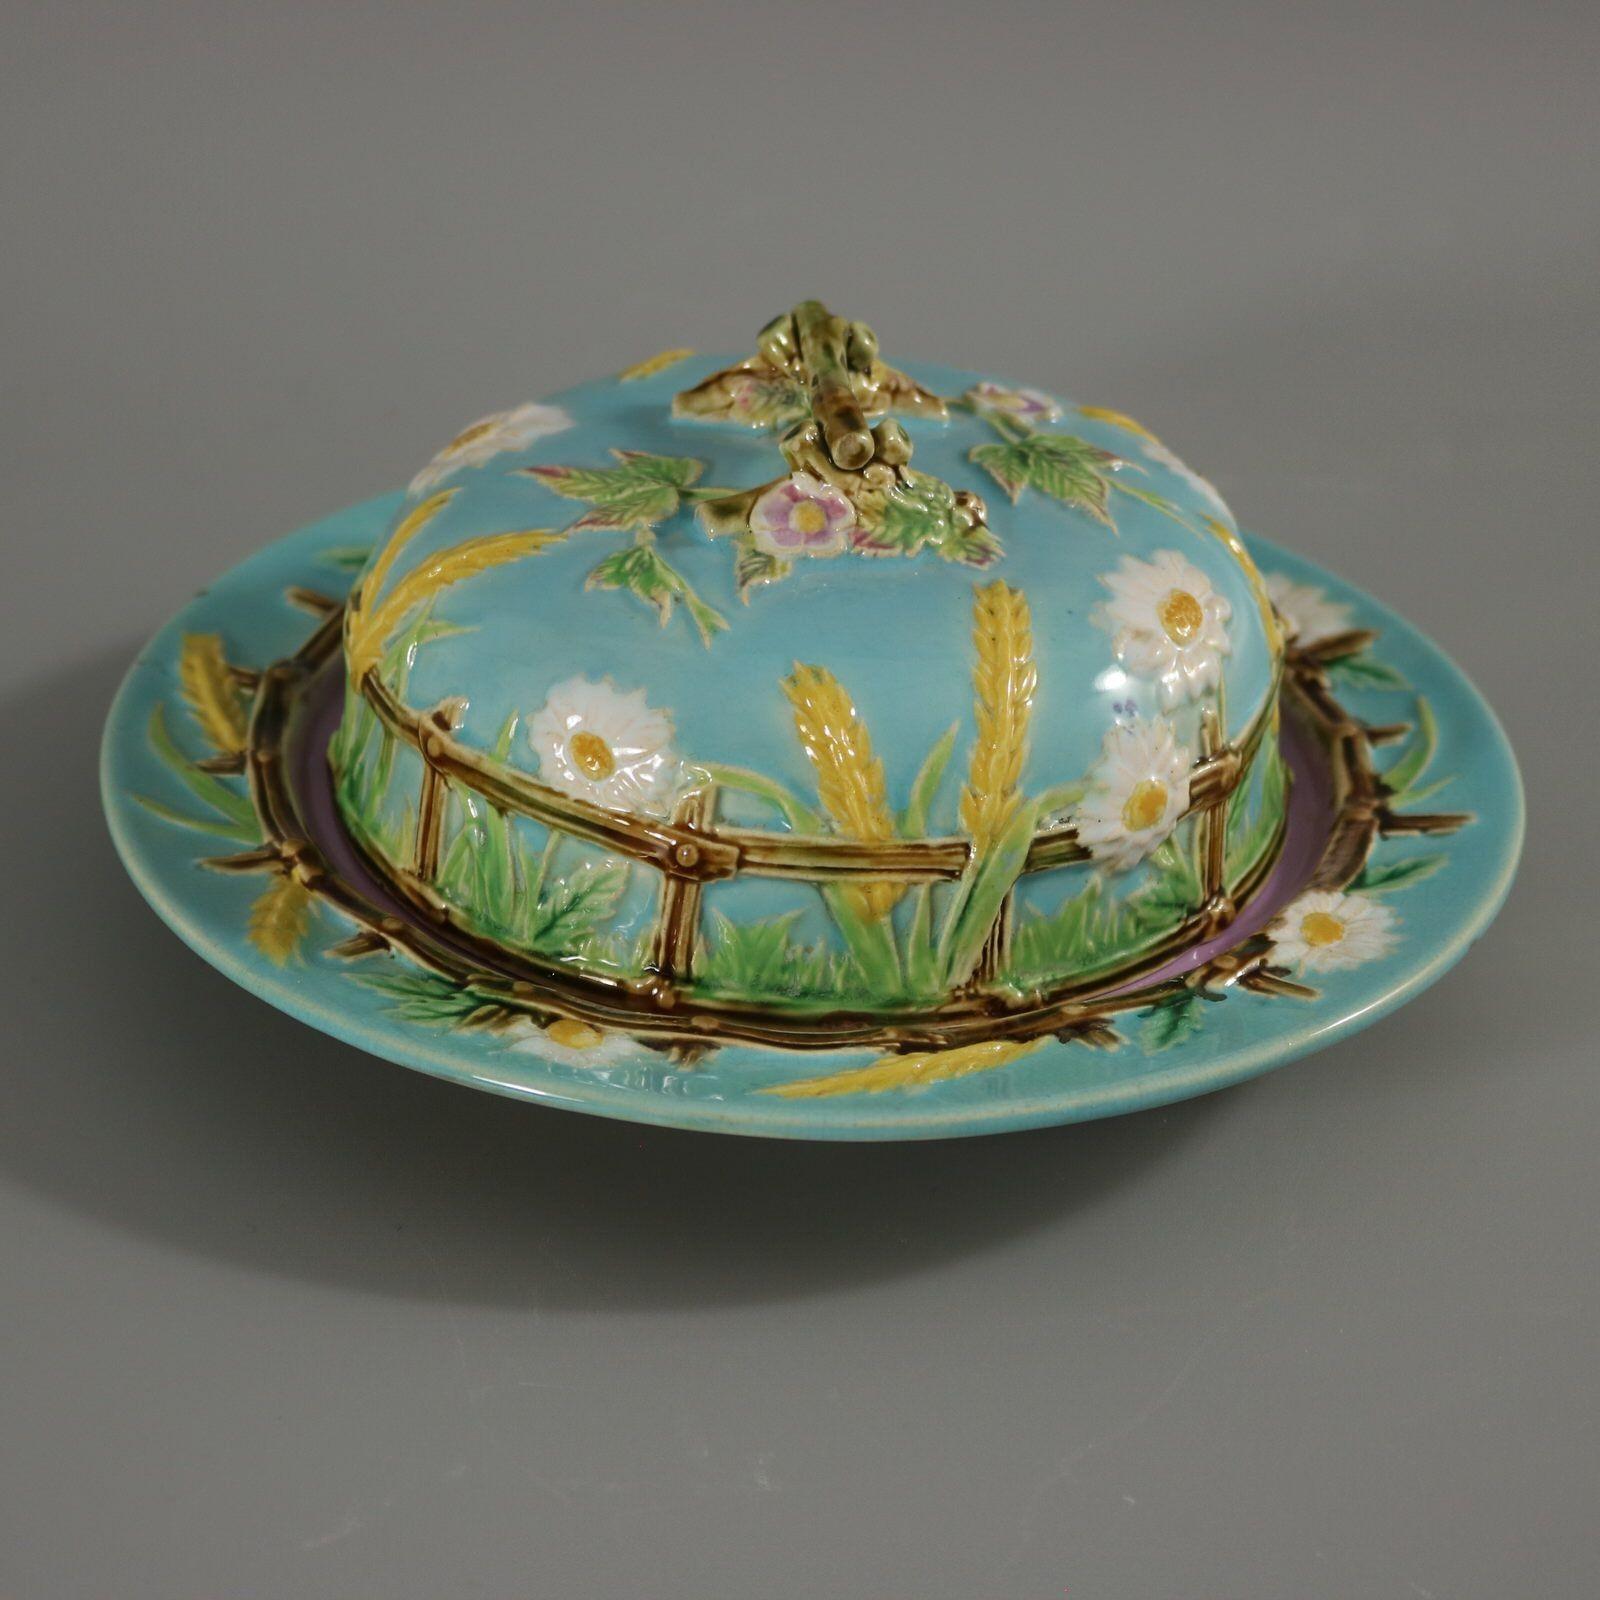 George Jones Majolica muffin dish and cover which features a picket fence, daisies, corn, brambles and a twig handle. Turquoise ground version. Colouration: turquoise, green, yellow, are predominant. Bears a pattern number, '1111'.